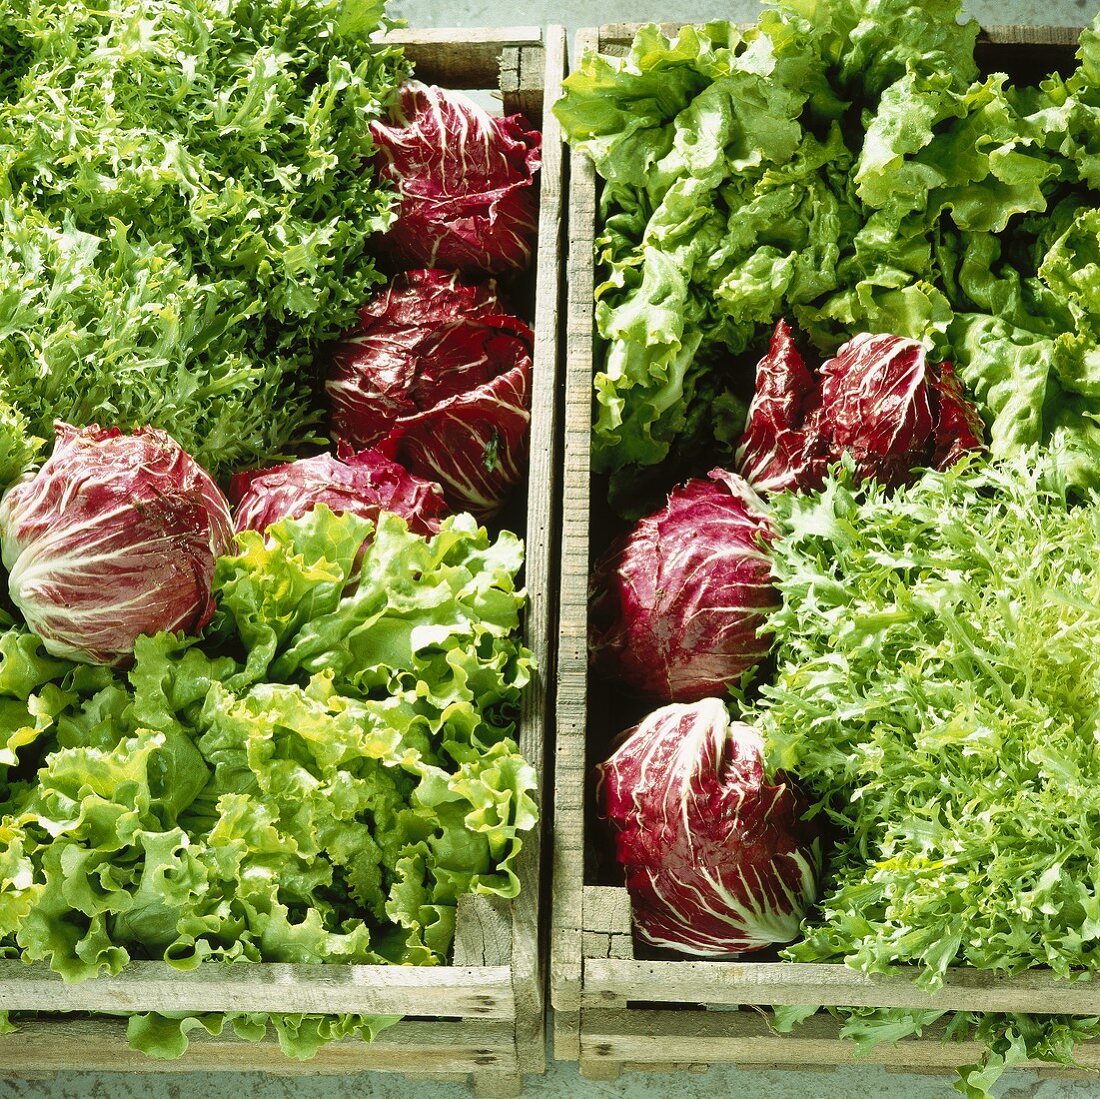 Lettuces in two crates